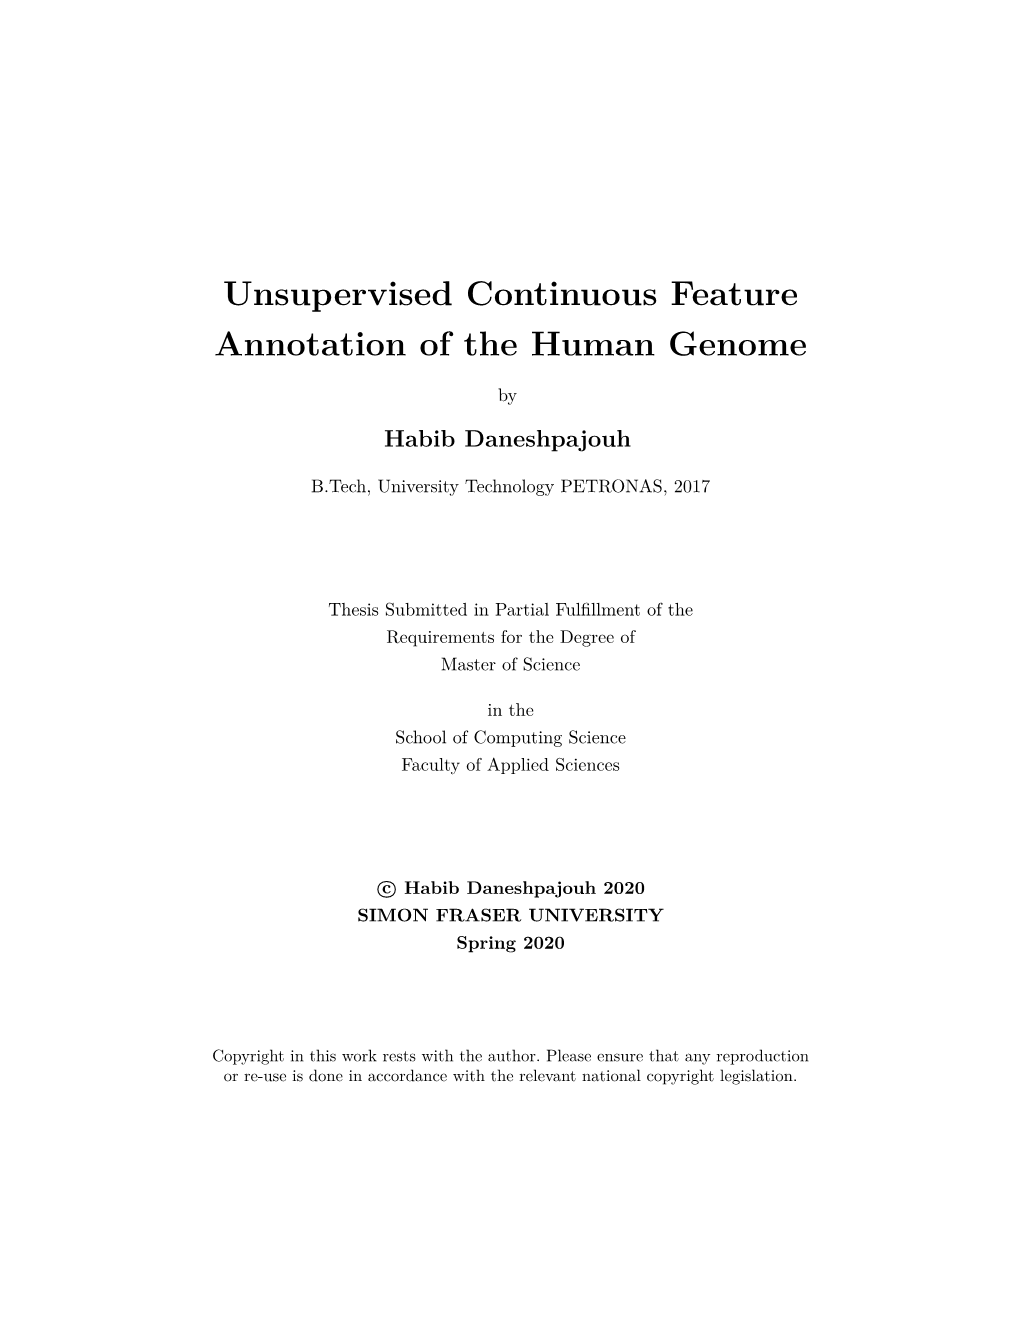 Unsupervised Continuous Feature Annotation of the Human Genome